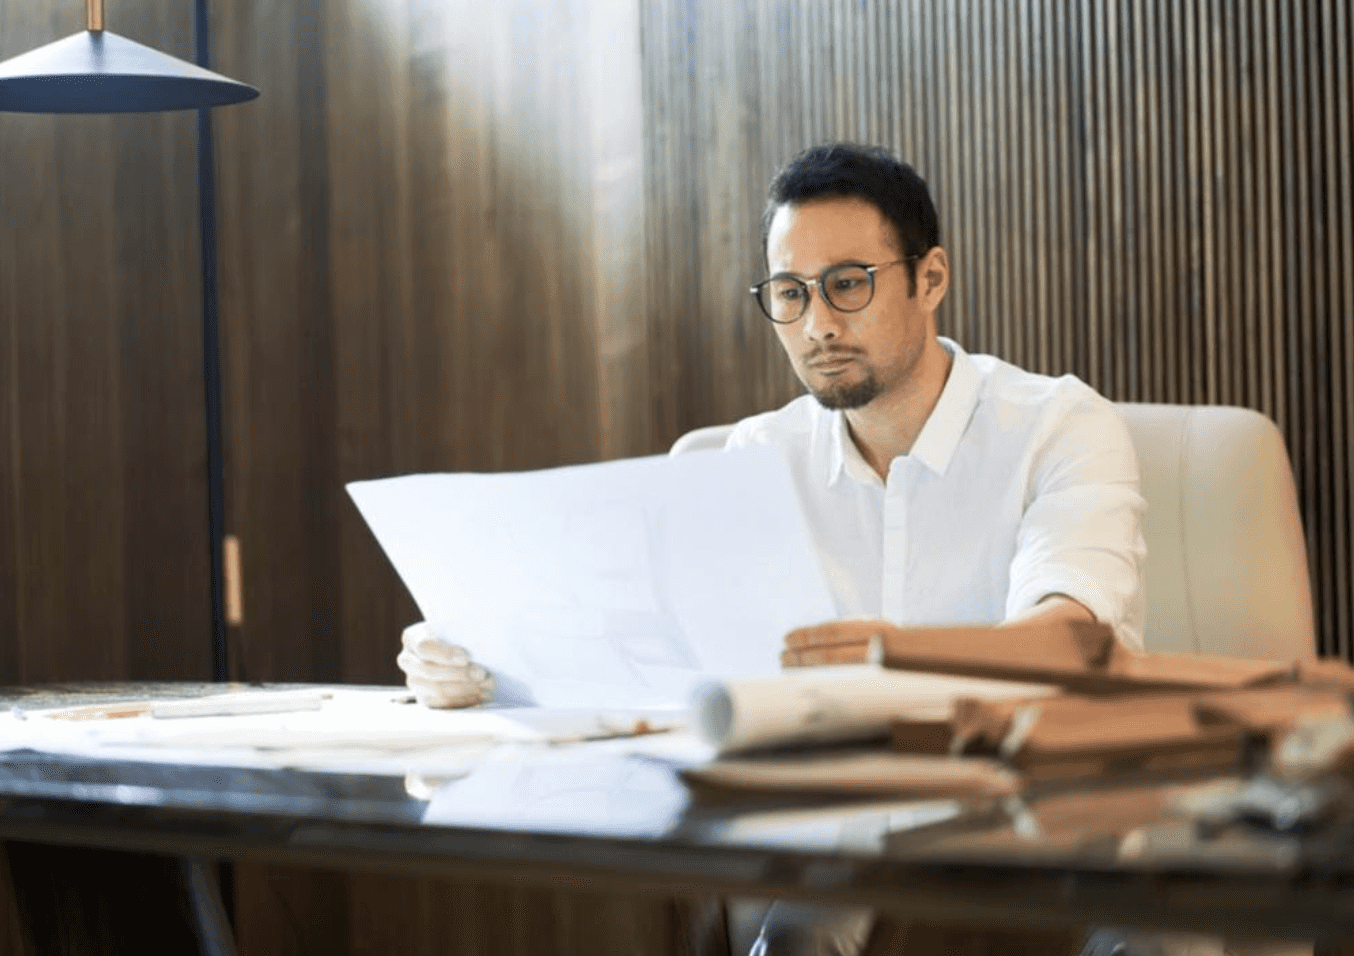 man at desk looking at papers